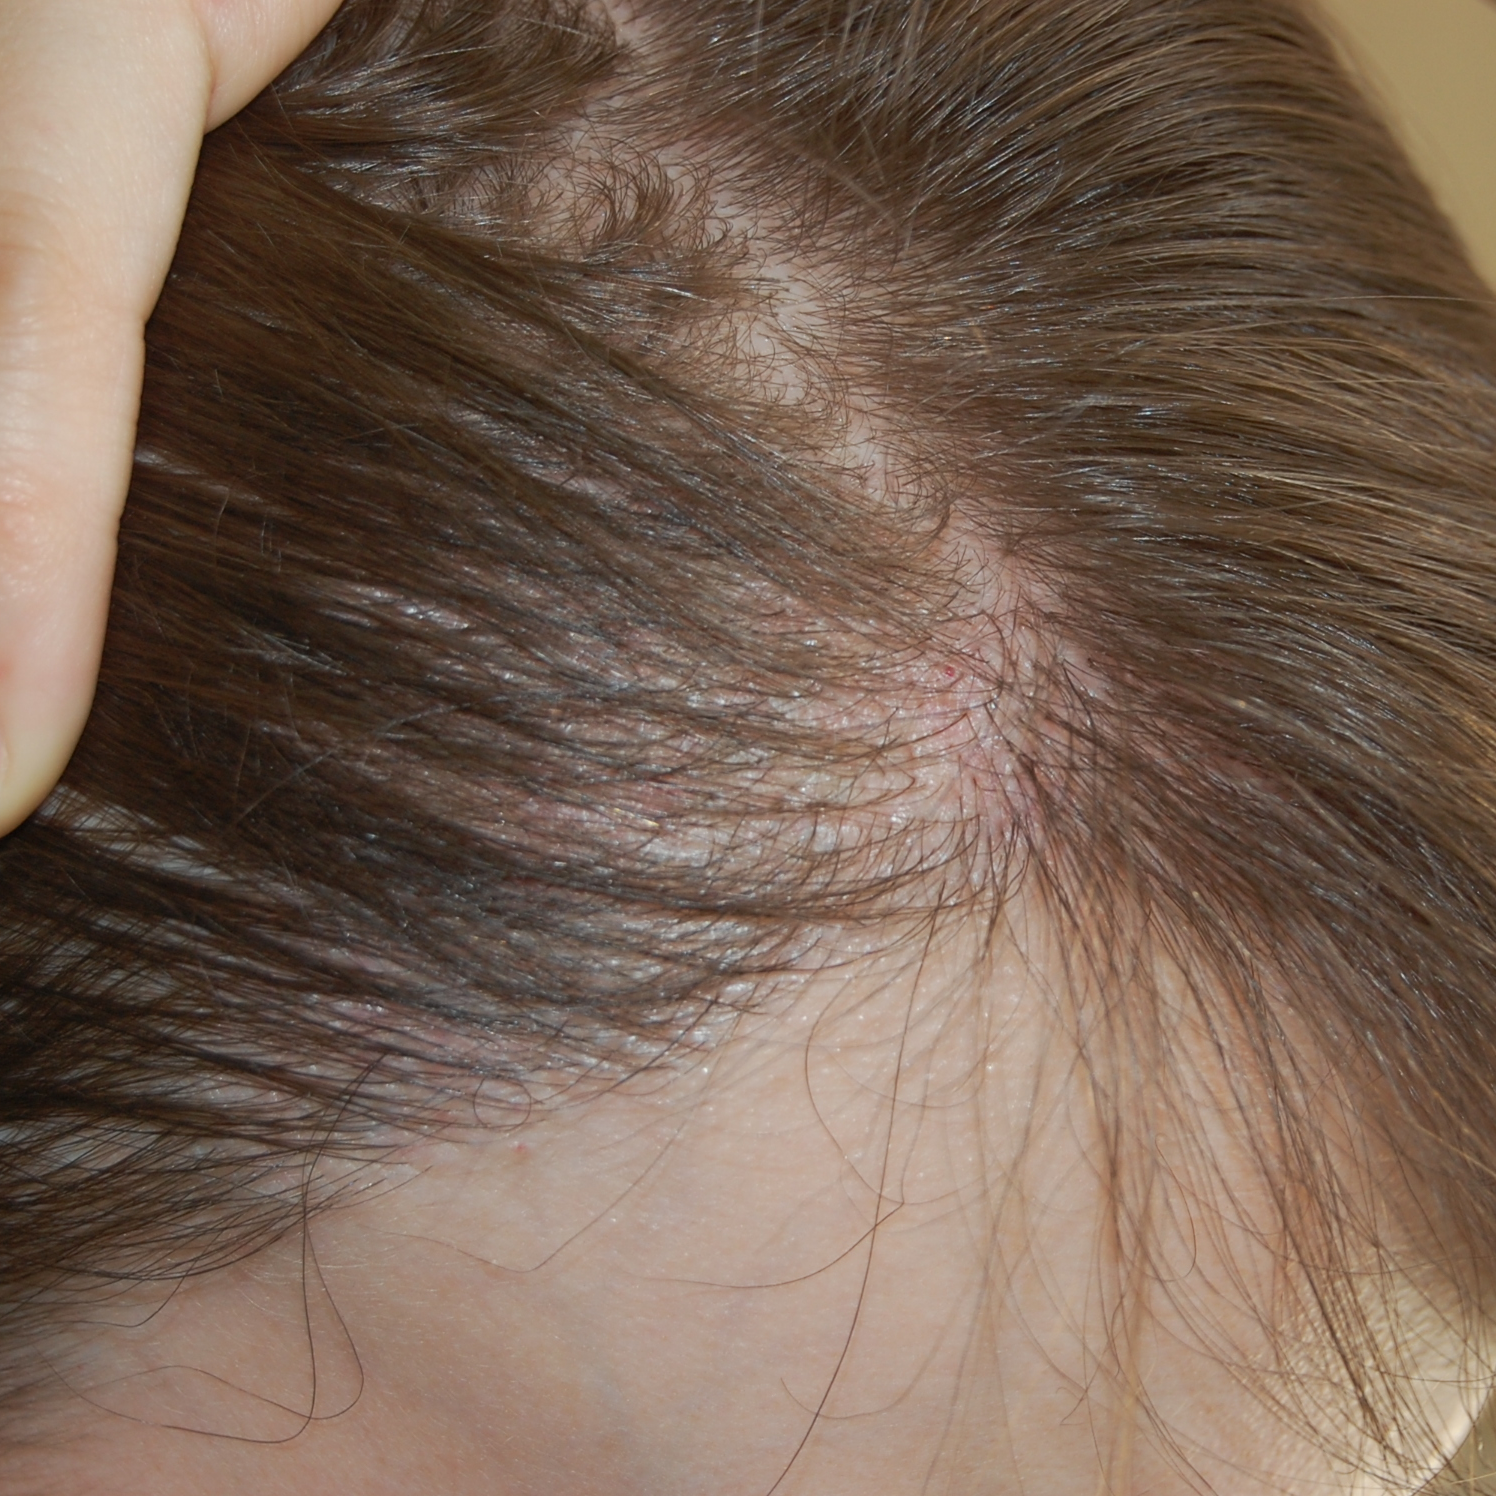 Hair Transplant After 6 Months: Photos, Results, Side Effects, Wimpole Clinic